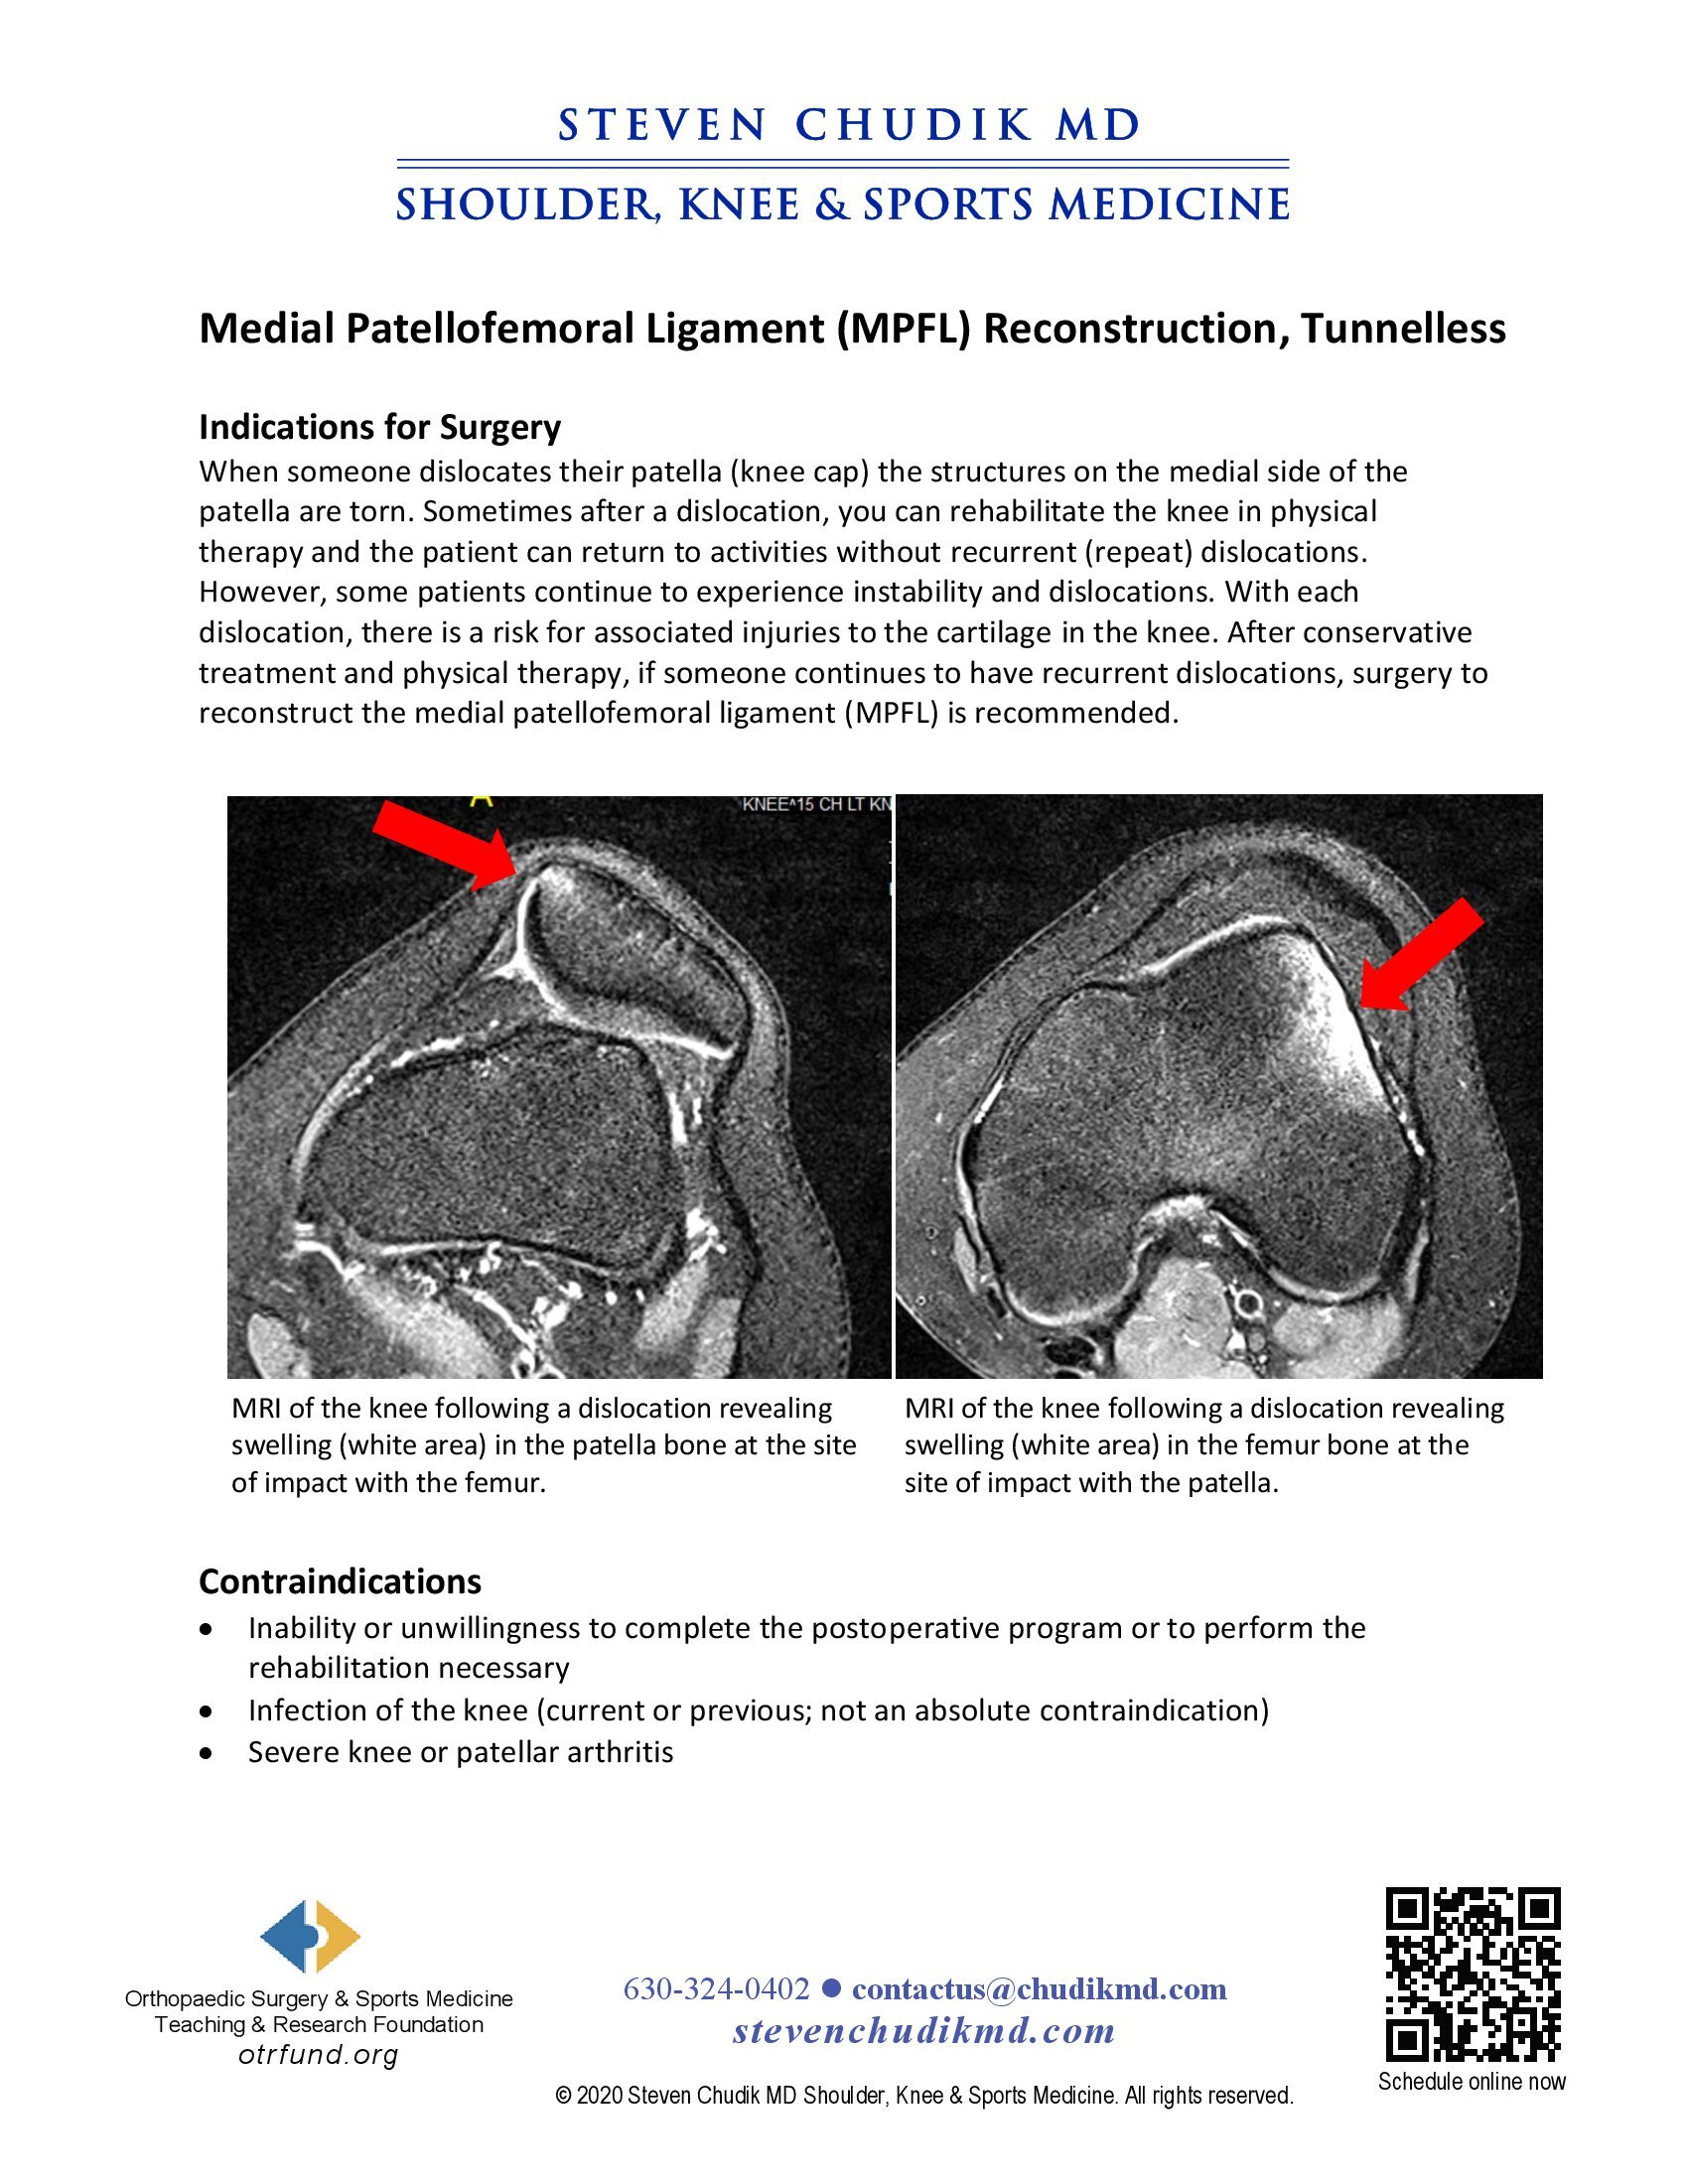 Medial Patellofemoral Ligament (MPFL) Tunnelless Reconstruction ...